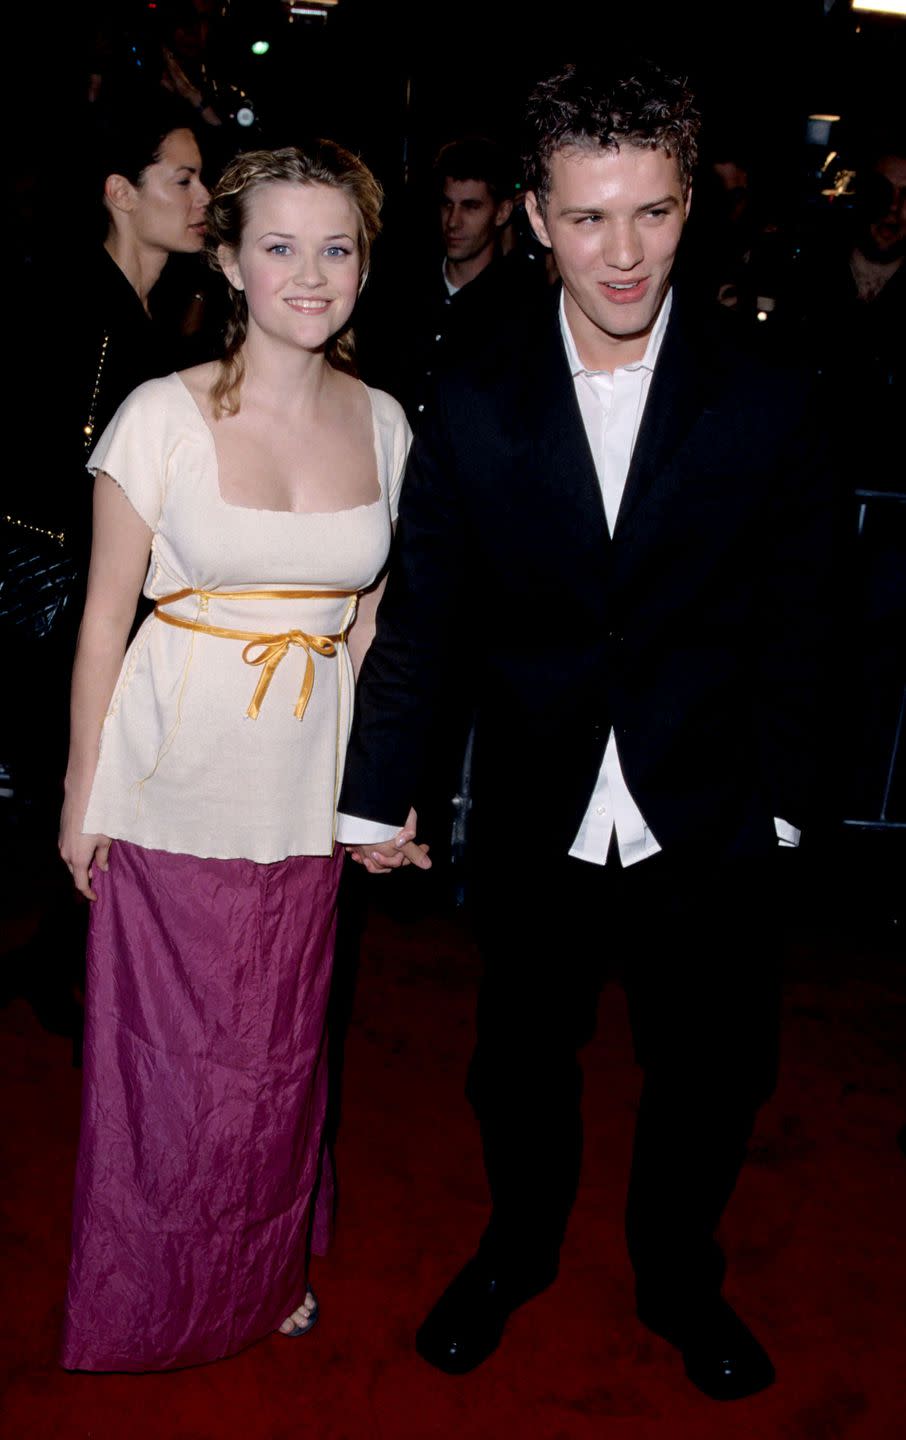 <p>In 1999, Witherspoon scored a huge hit with her role in <em>Cruel Intentions</em>, as well as her role in <em>Election</em>. Still, her style hadn't grown up just yet, as evidenced by this photo of her and Phillippe at the <em>Cruel Intentions</em> premiere.<br></p>